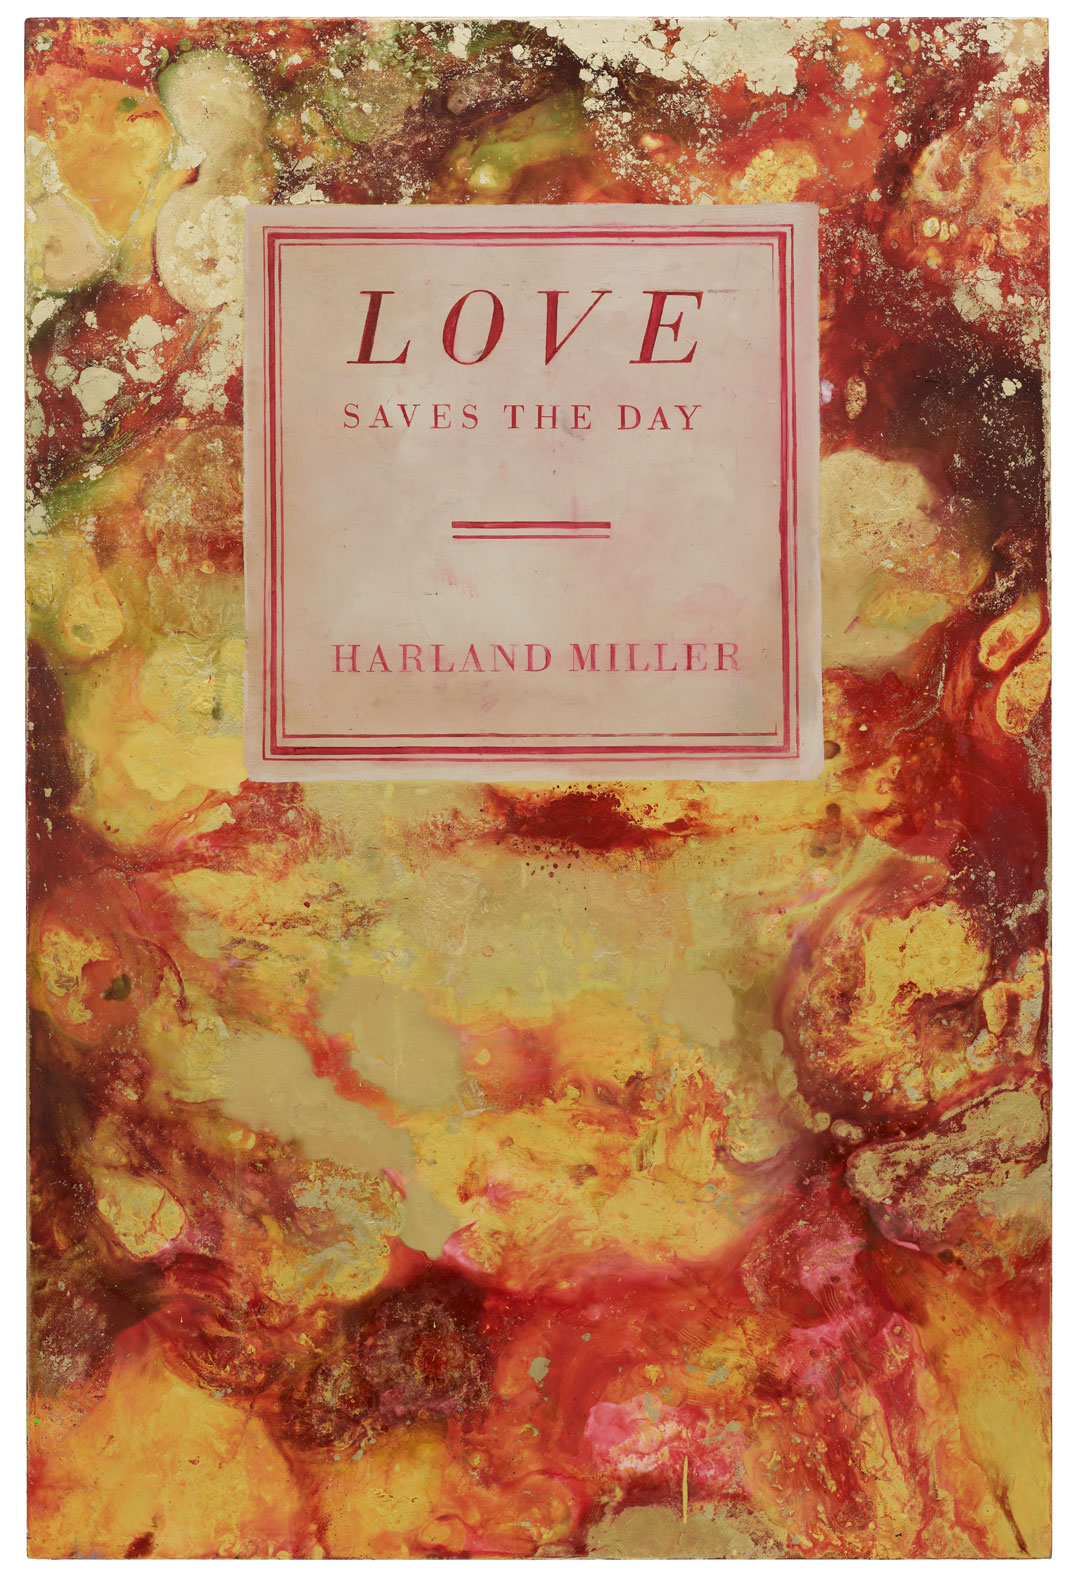 Love Saves the Day (2012) by Harland Miller, from the artist's Poets series. As reproduced in Harland Miller: In Shadows I Boogie